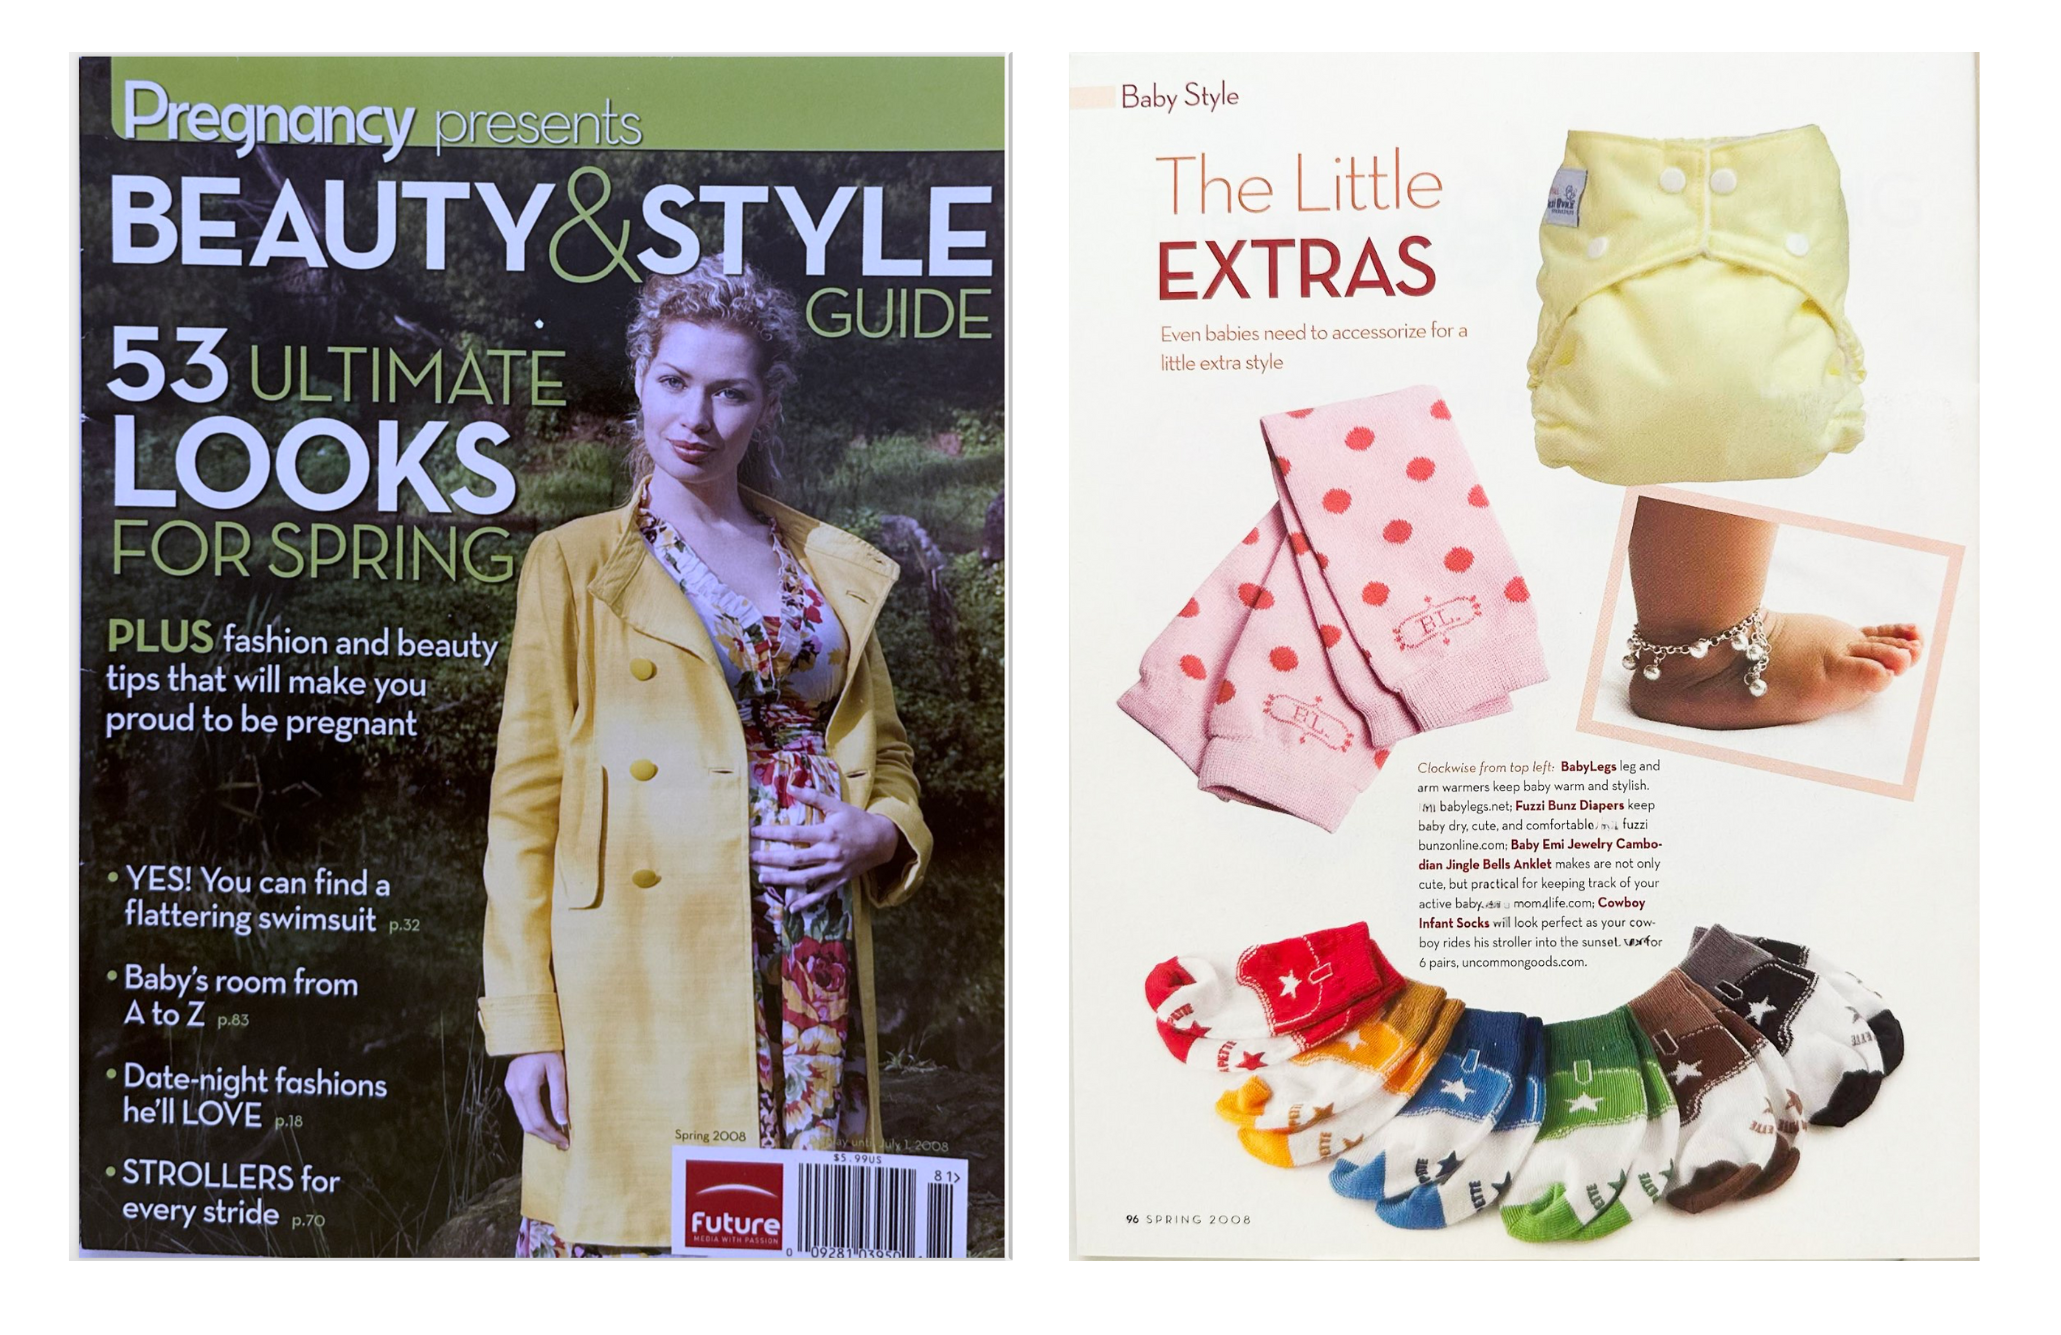 Pregnancy presents Beauty and Style Guide Spring 2008